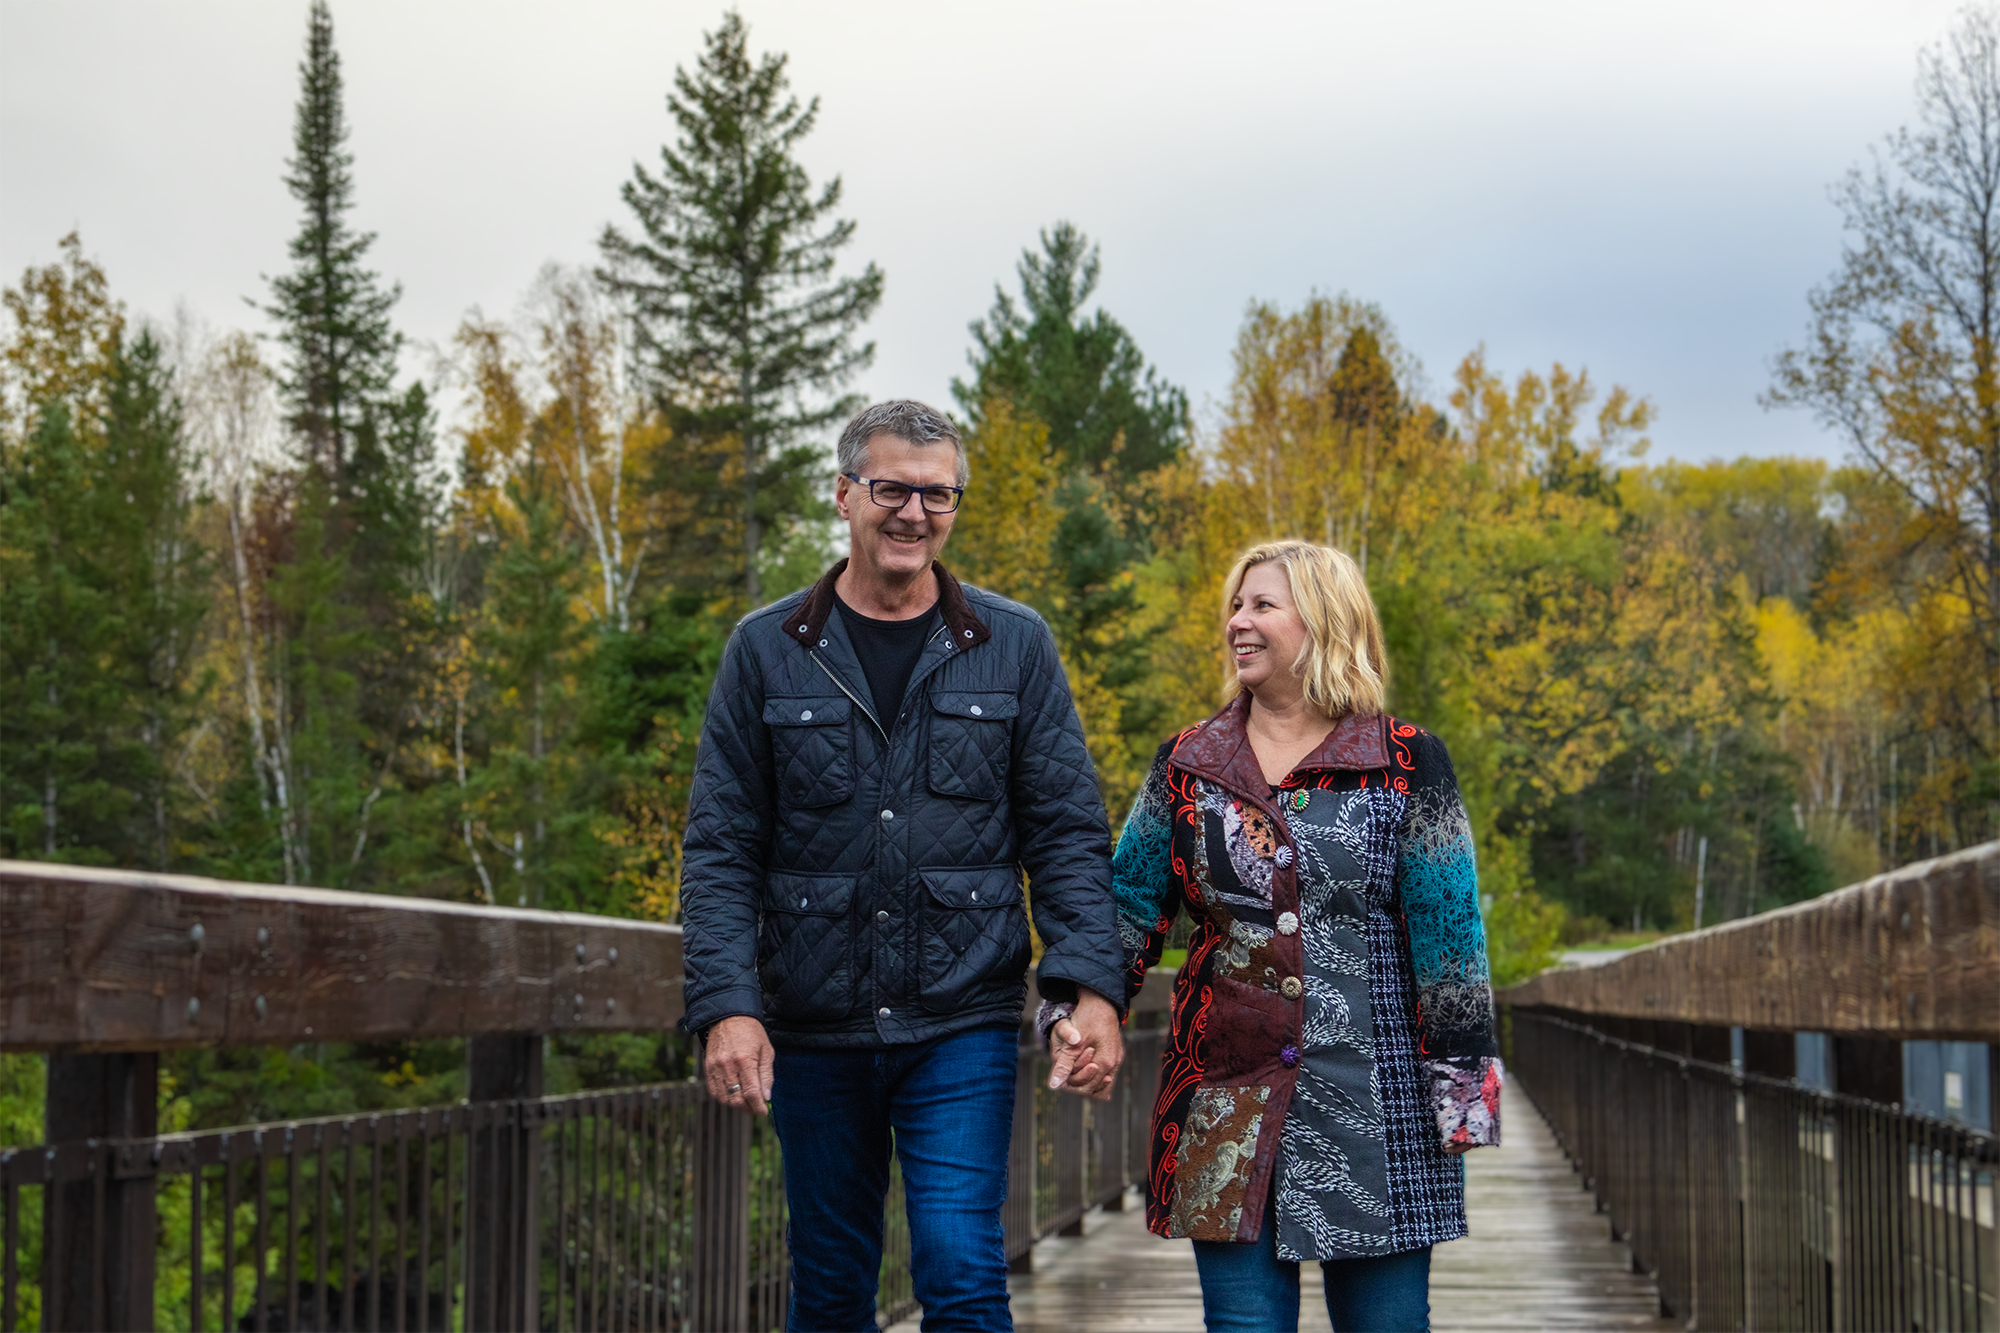 MPP Kevin Holland and his wife Lori walking on a bridge, with Lori looking up at Kevin, who is looking forward. The background is adorned with trees showcasing autumn colors, adding a serene and picturesque quality to the scene.